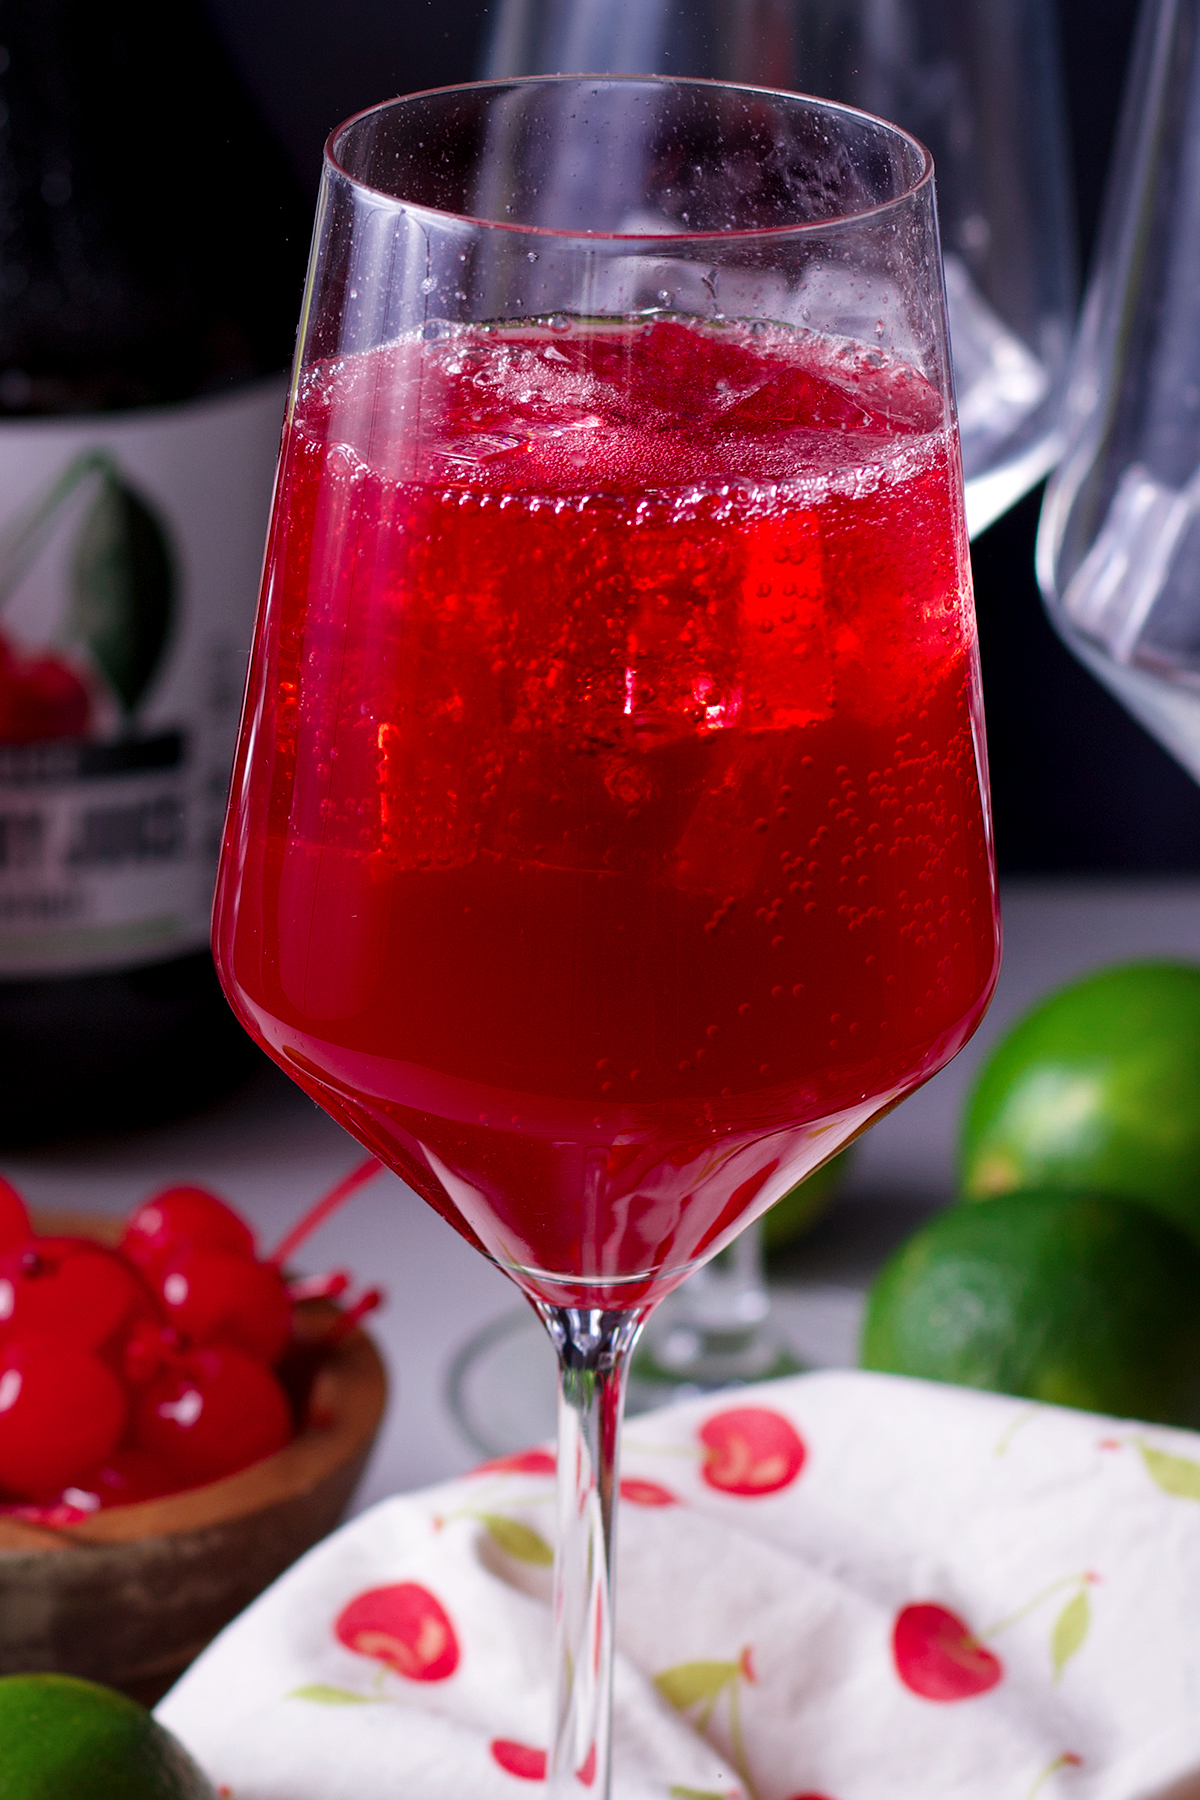 A glass filled with vodka, cherry juice, grenadine, and lime juice that's just been topped with lemon lime soda.